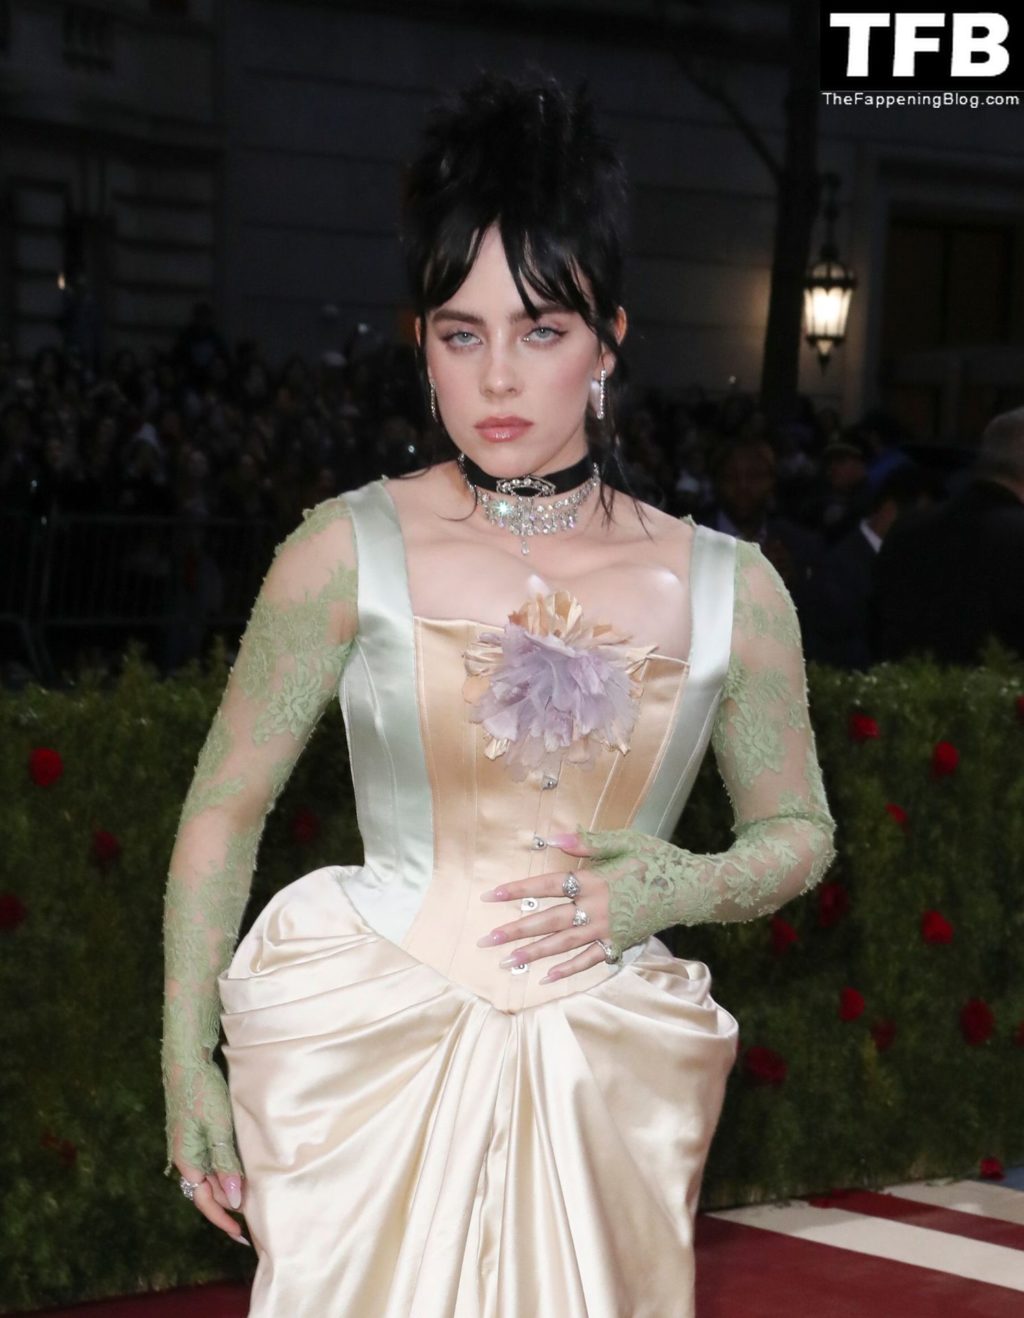 Billie Eilish Sexy The Fappening Blog 144 1024x1318 - Billie Eilish Showcases Nice Cleavage at The 2022 Met Gala in NYC (155 Photos)